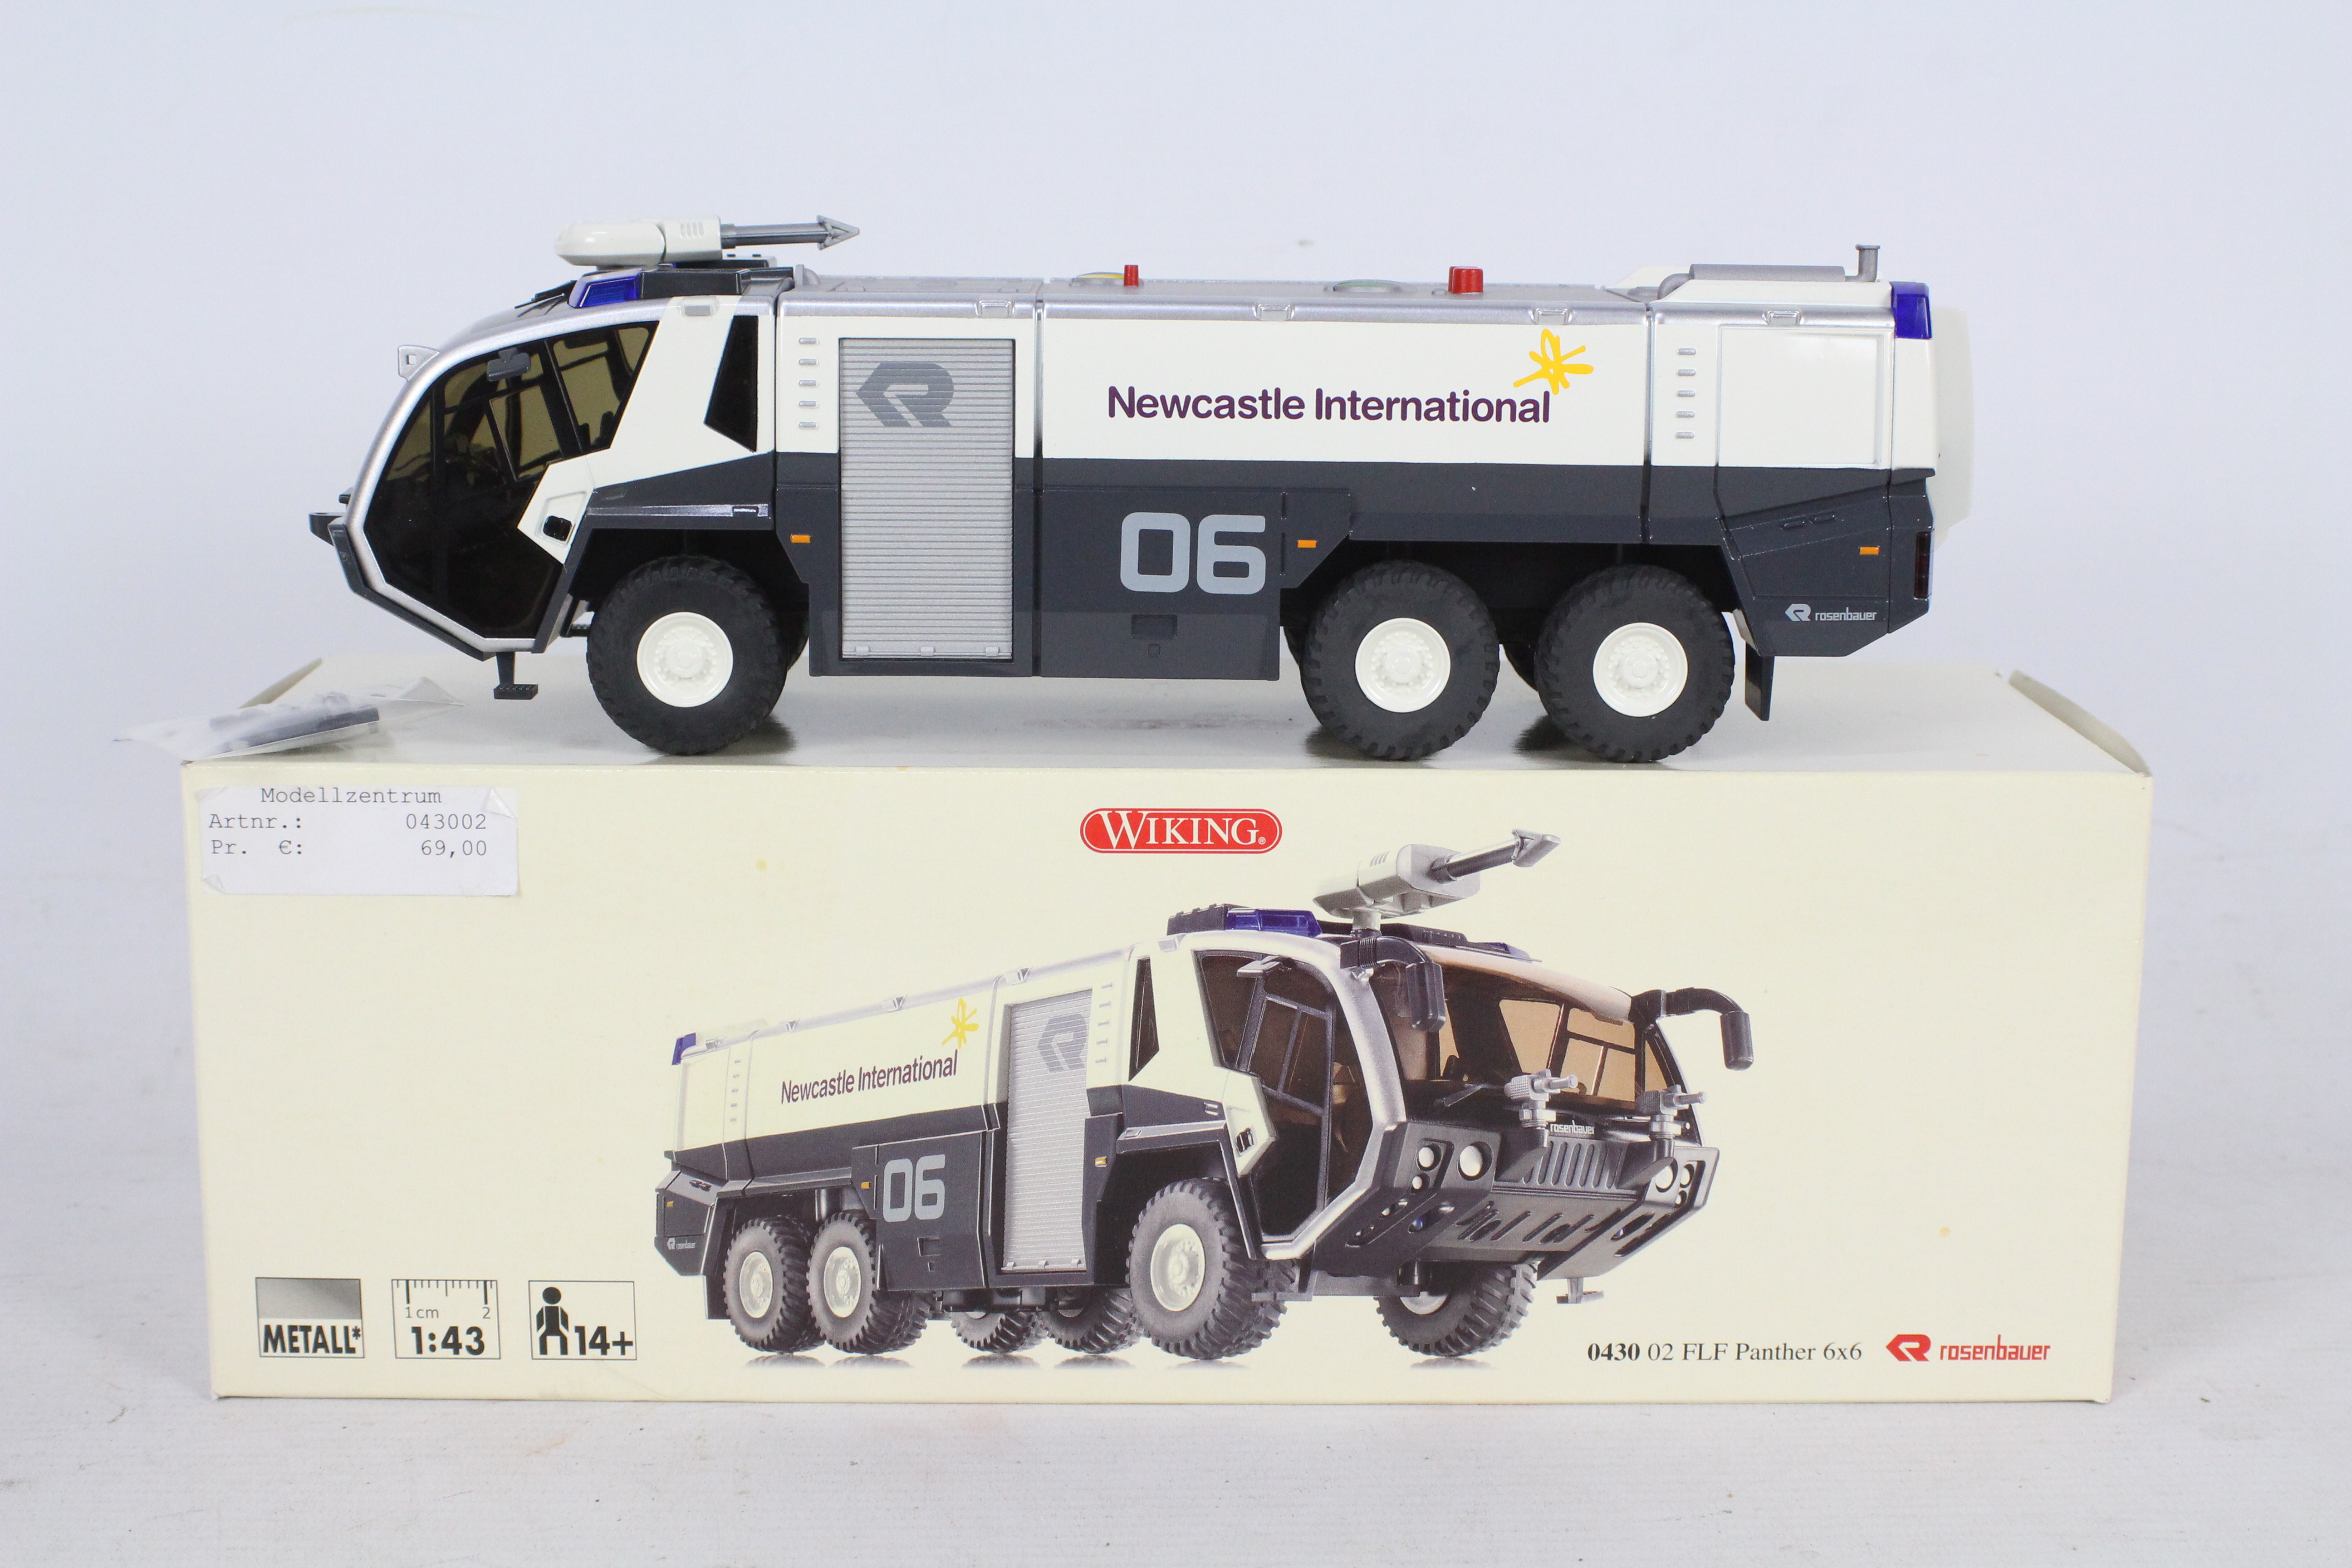 Wiking - A boxed diecast Wiking #043002 1:43 scale Rosenbauer FLF Panther 6x6 ARFF (Airport Rescue